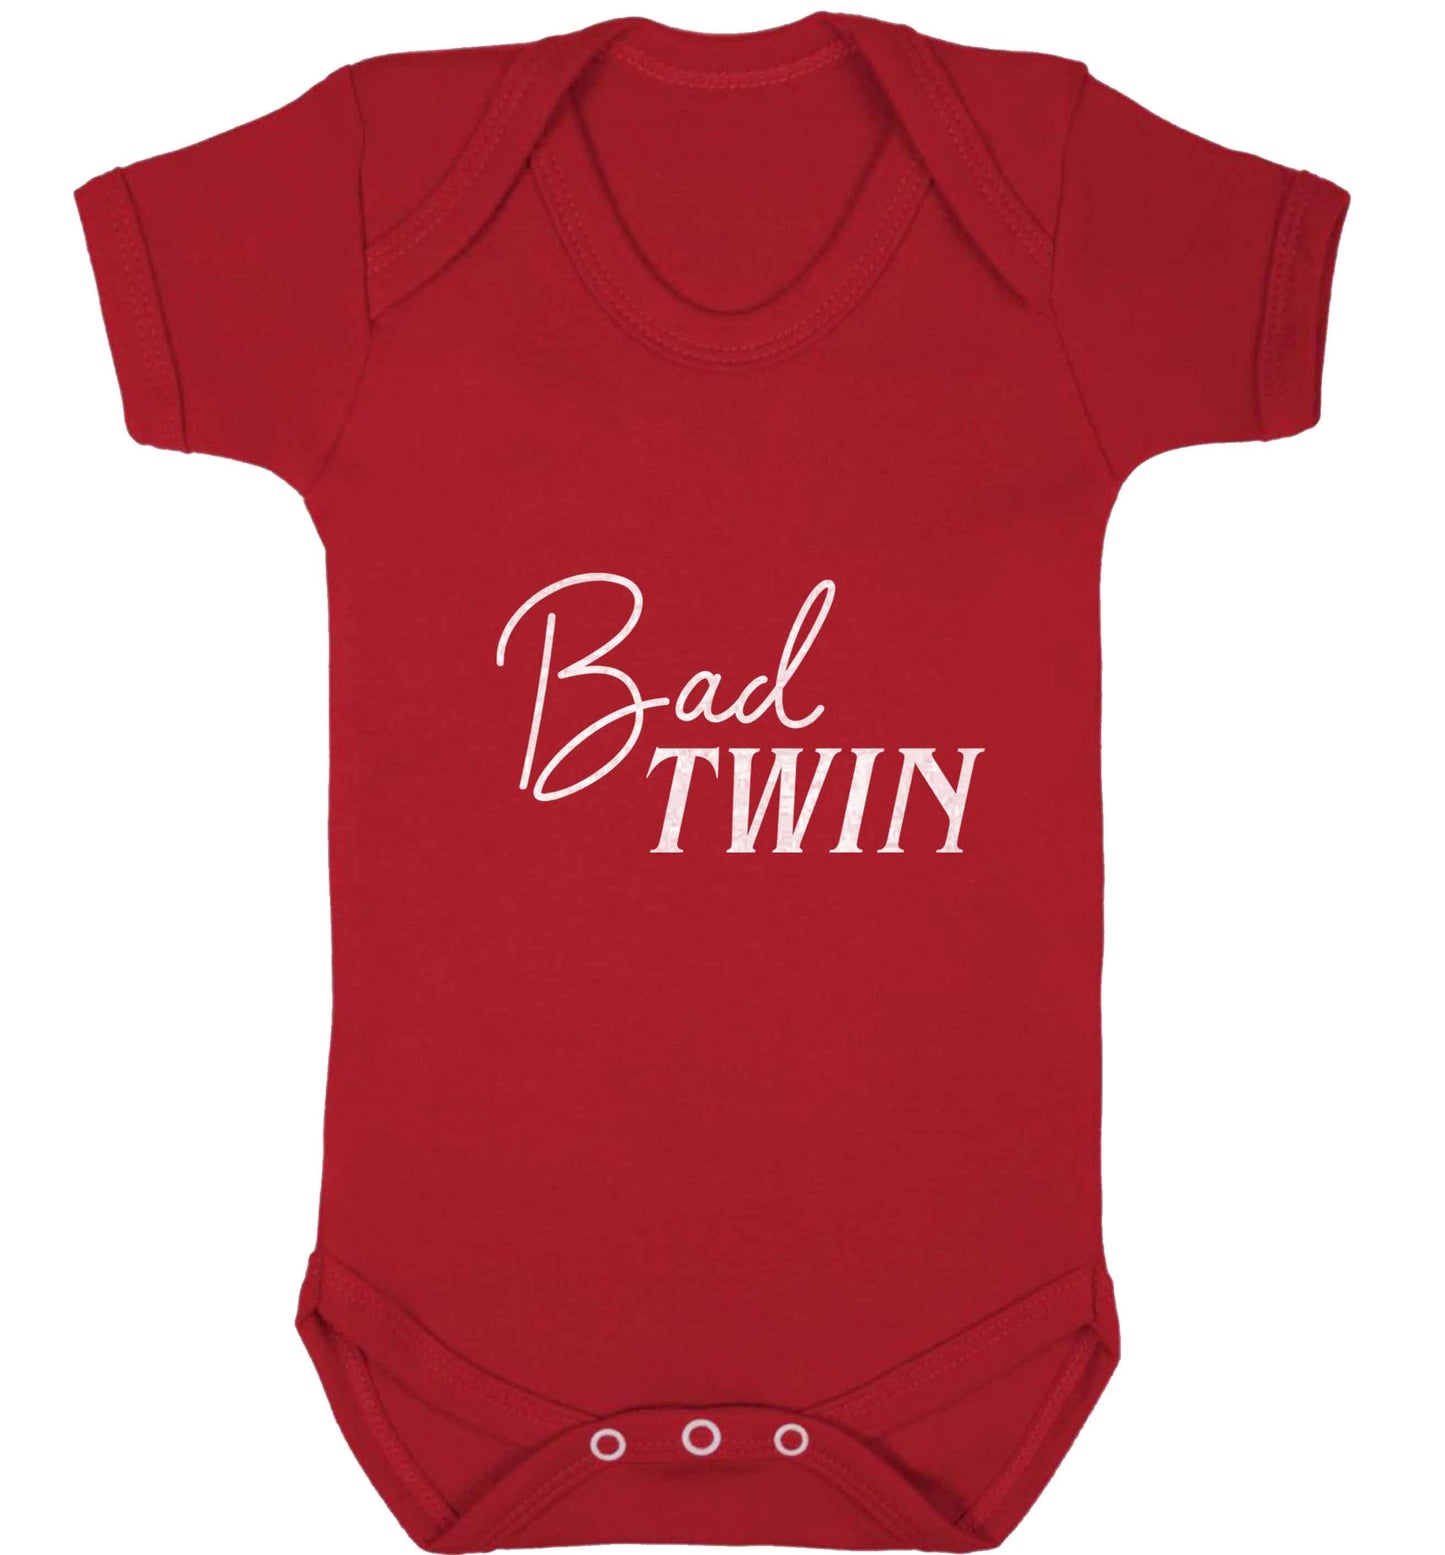 Bad twin baby vest red 18-24 months